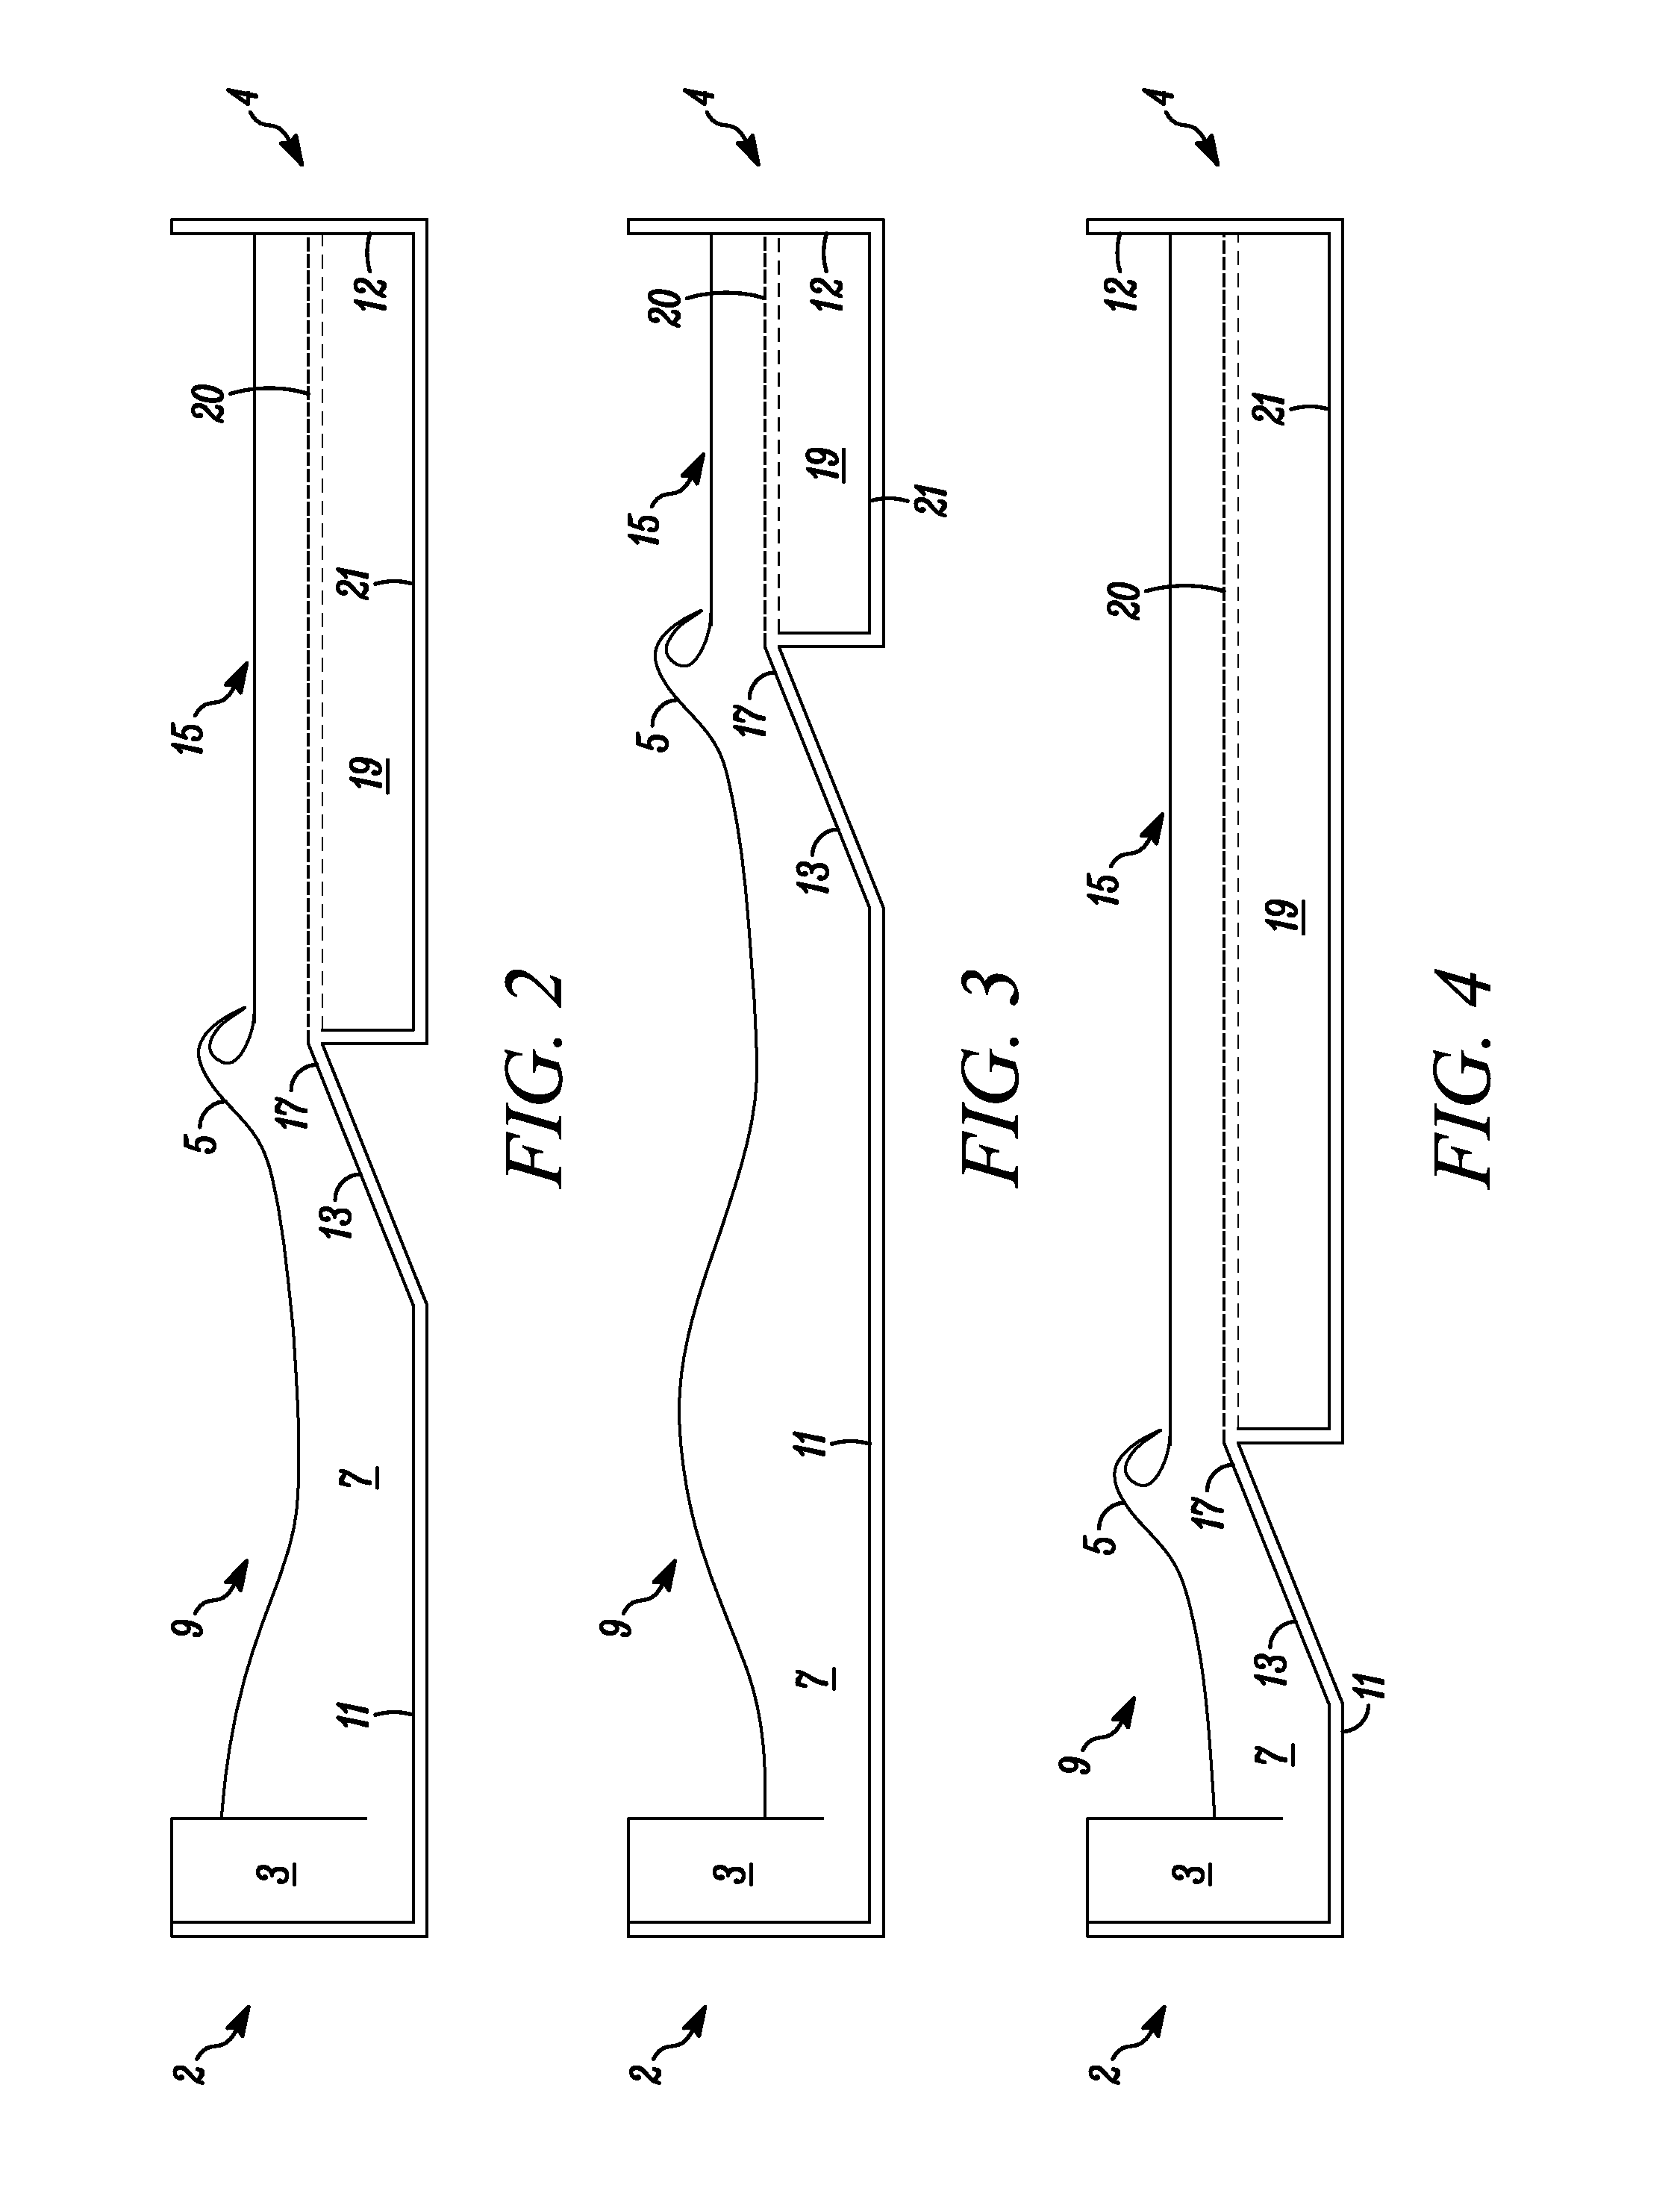 Method and apparatus for dampening waves in a wave pool